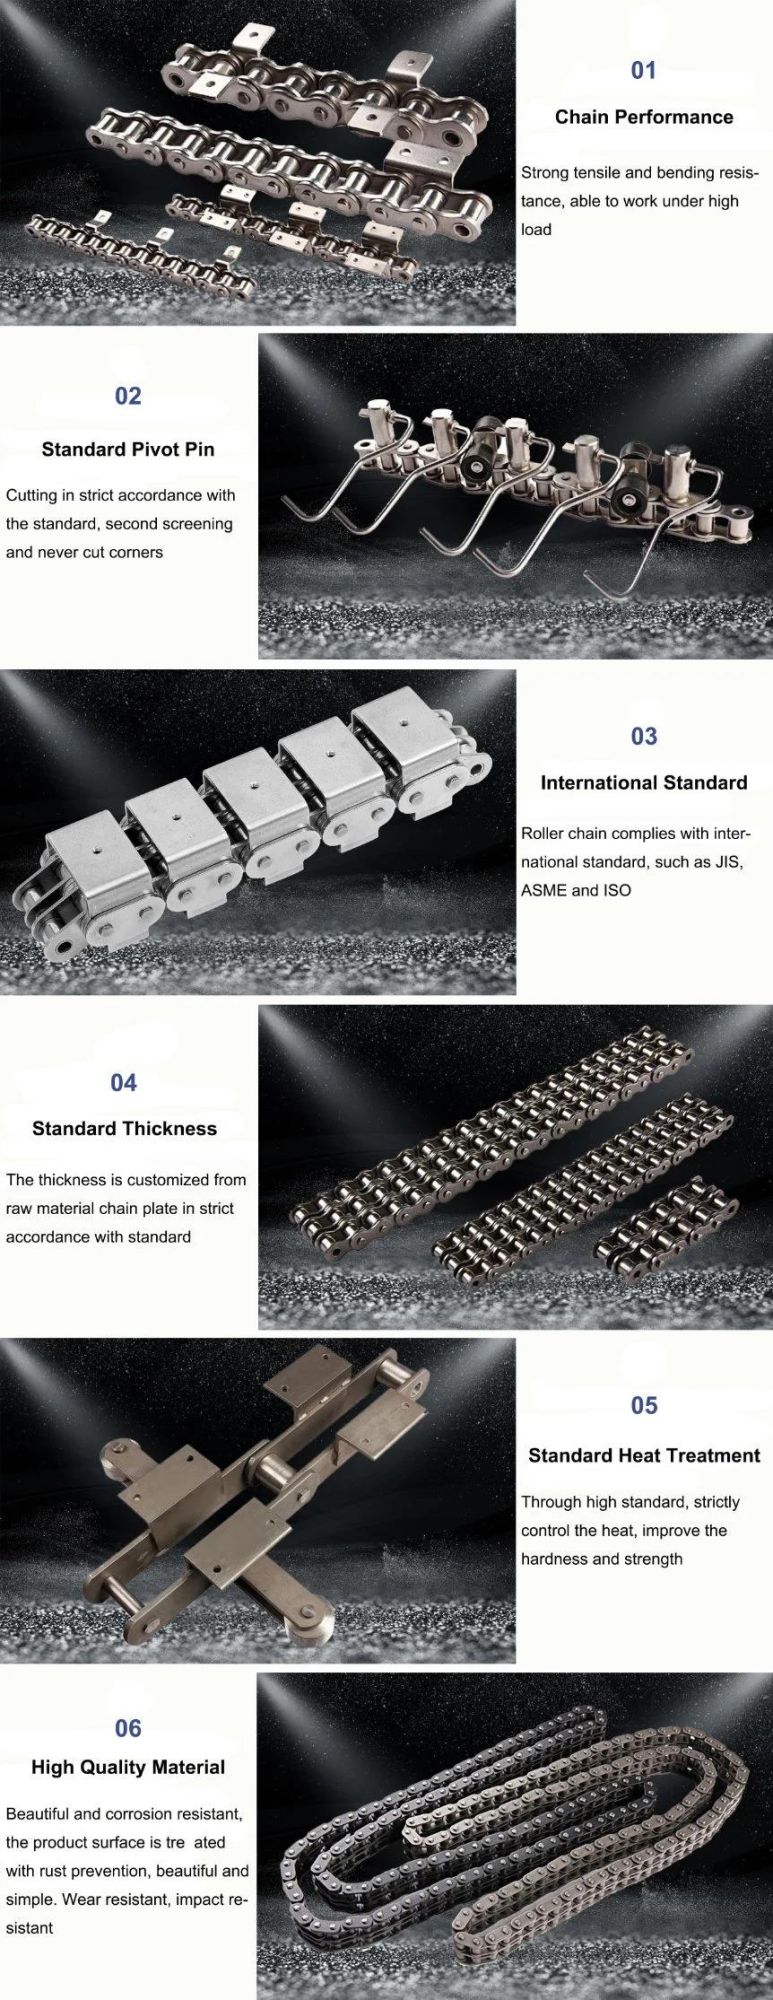 DIN ANSI ISO BS Js Standard Stainless Steel Lumber Conveyor Roller Chain and Attachment